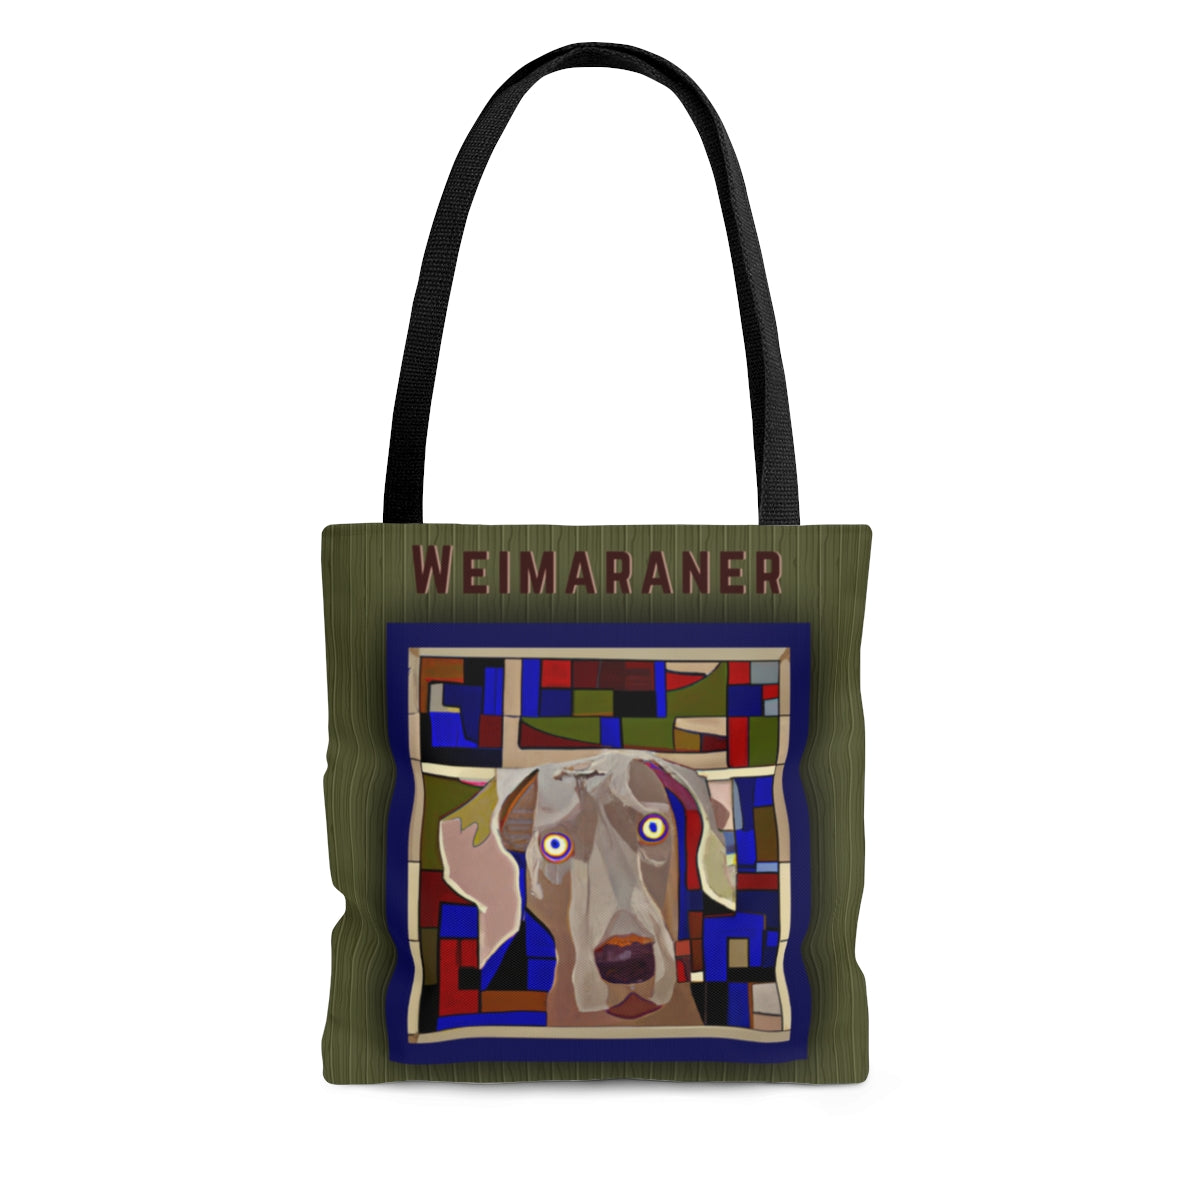 Weimaraner Tote Bag, Retro Bag for Weime Lovers - The Dapper Dogg